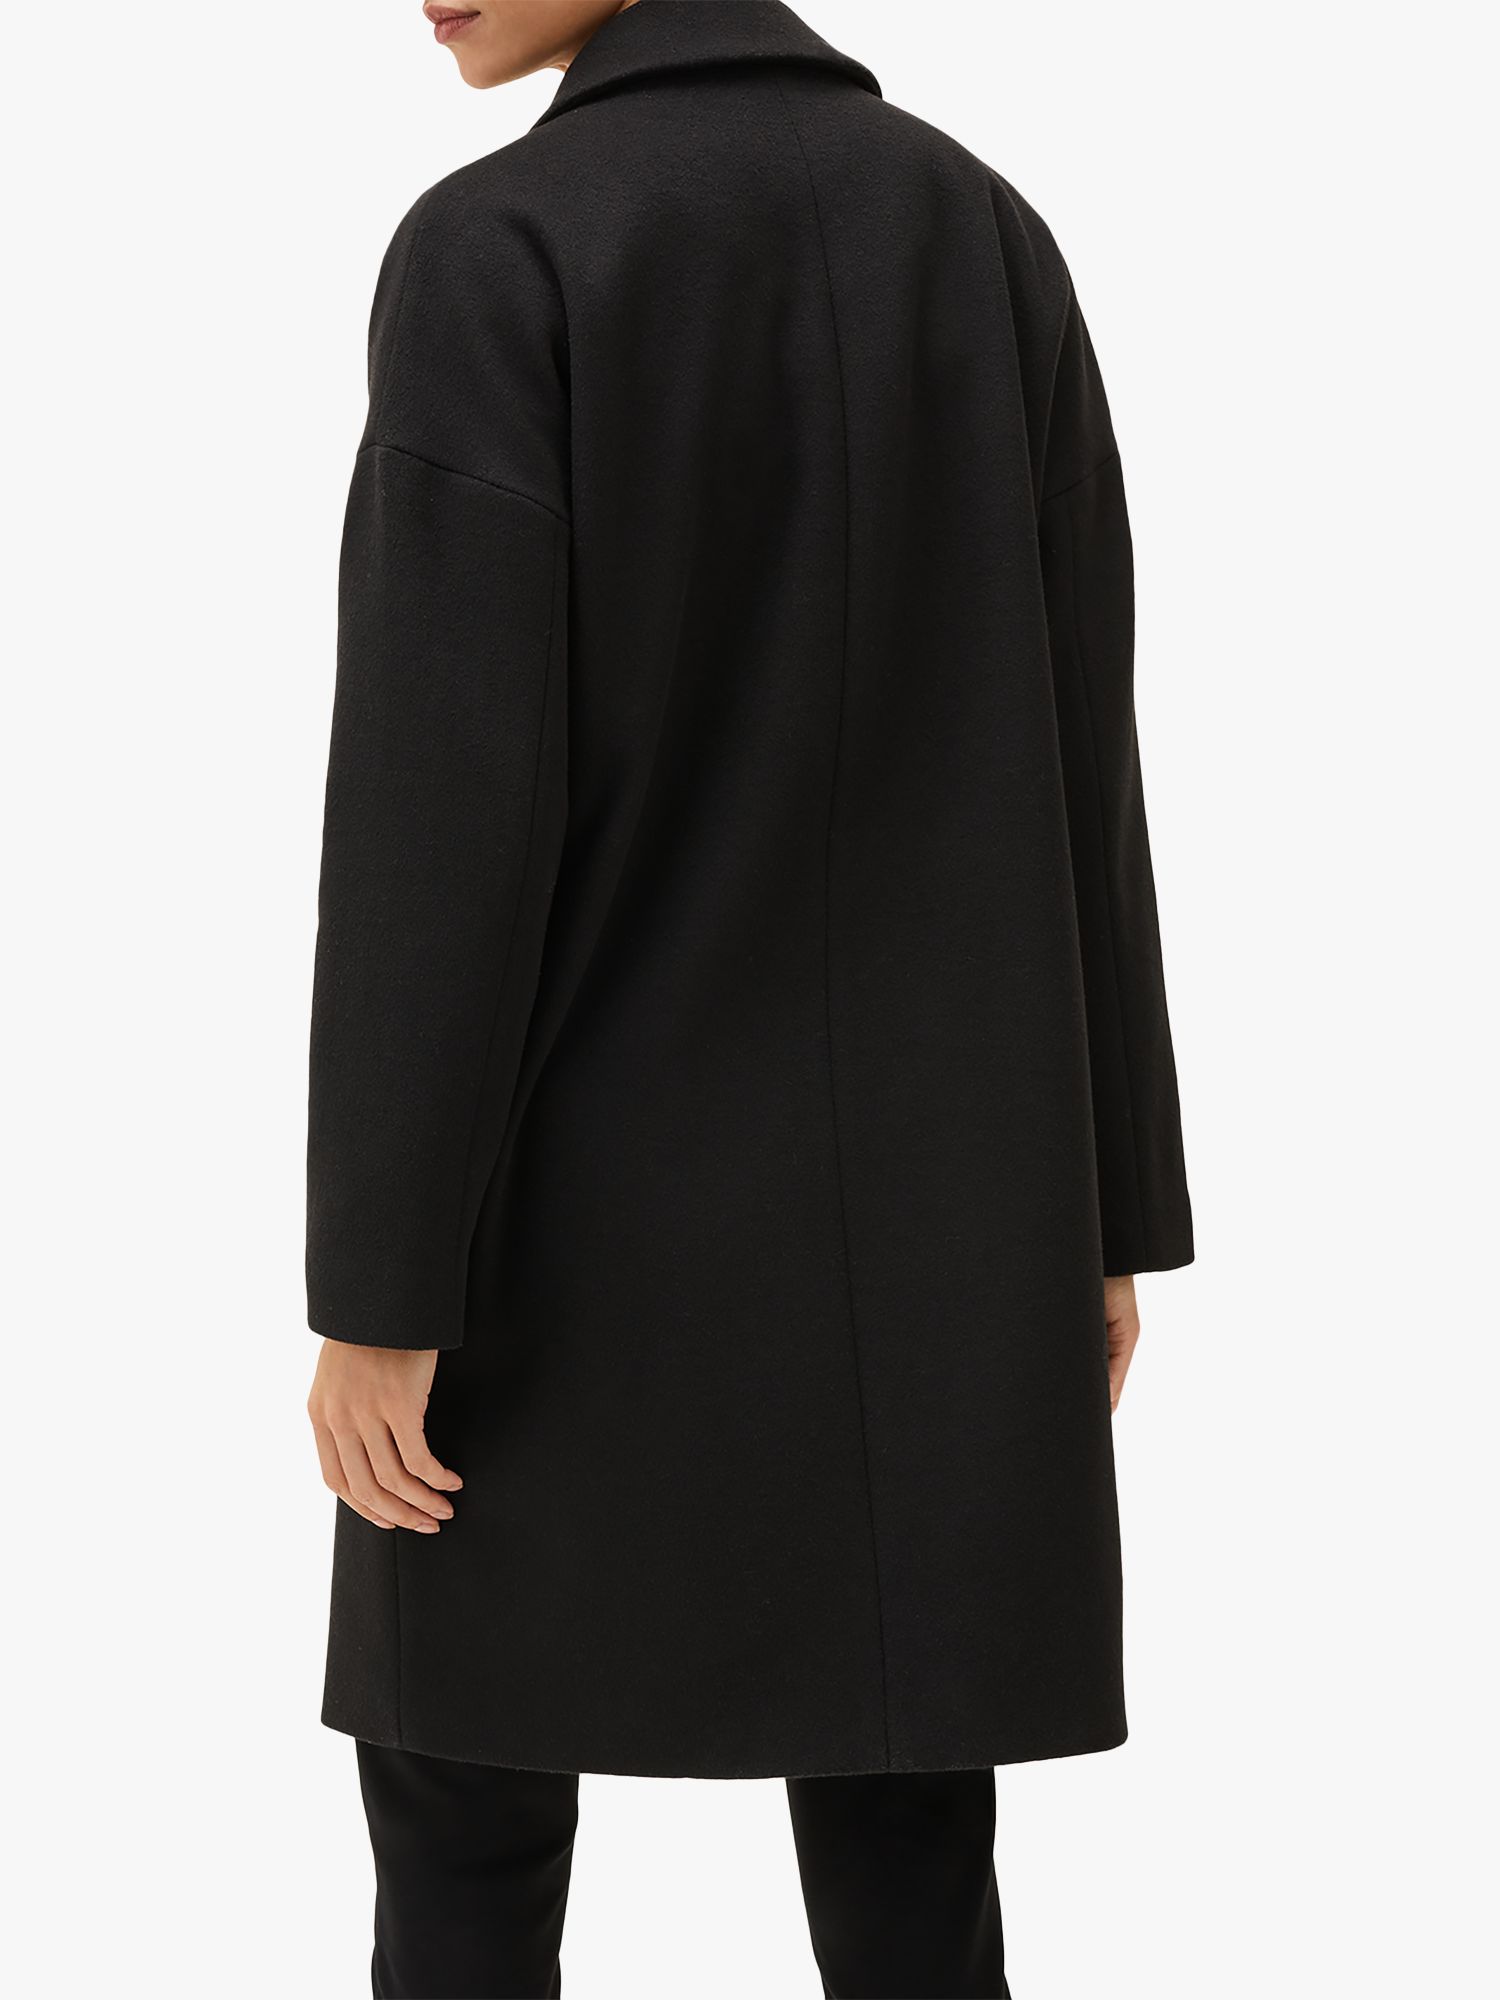 Phase Eight Emery Double Breasted Coat, Black at John Lewis & Partners